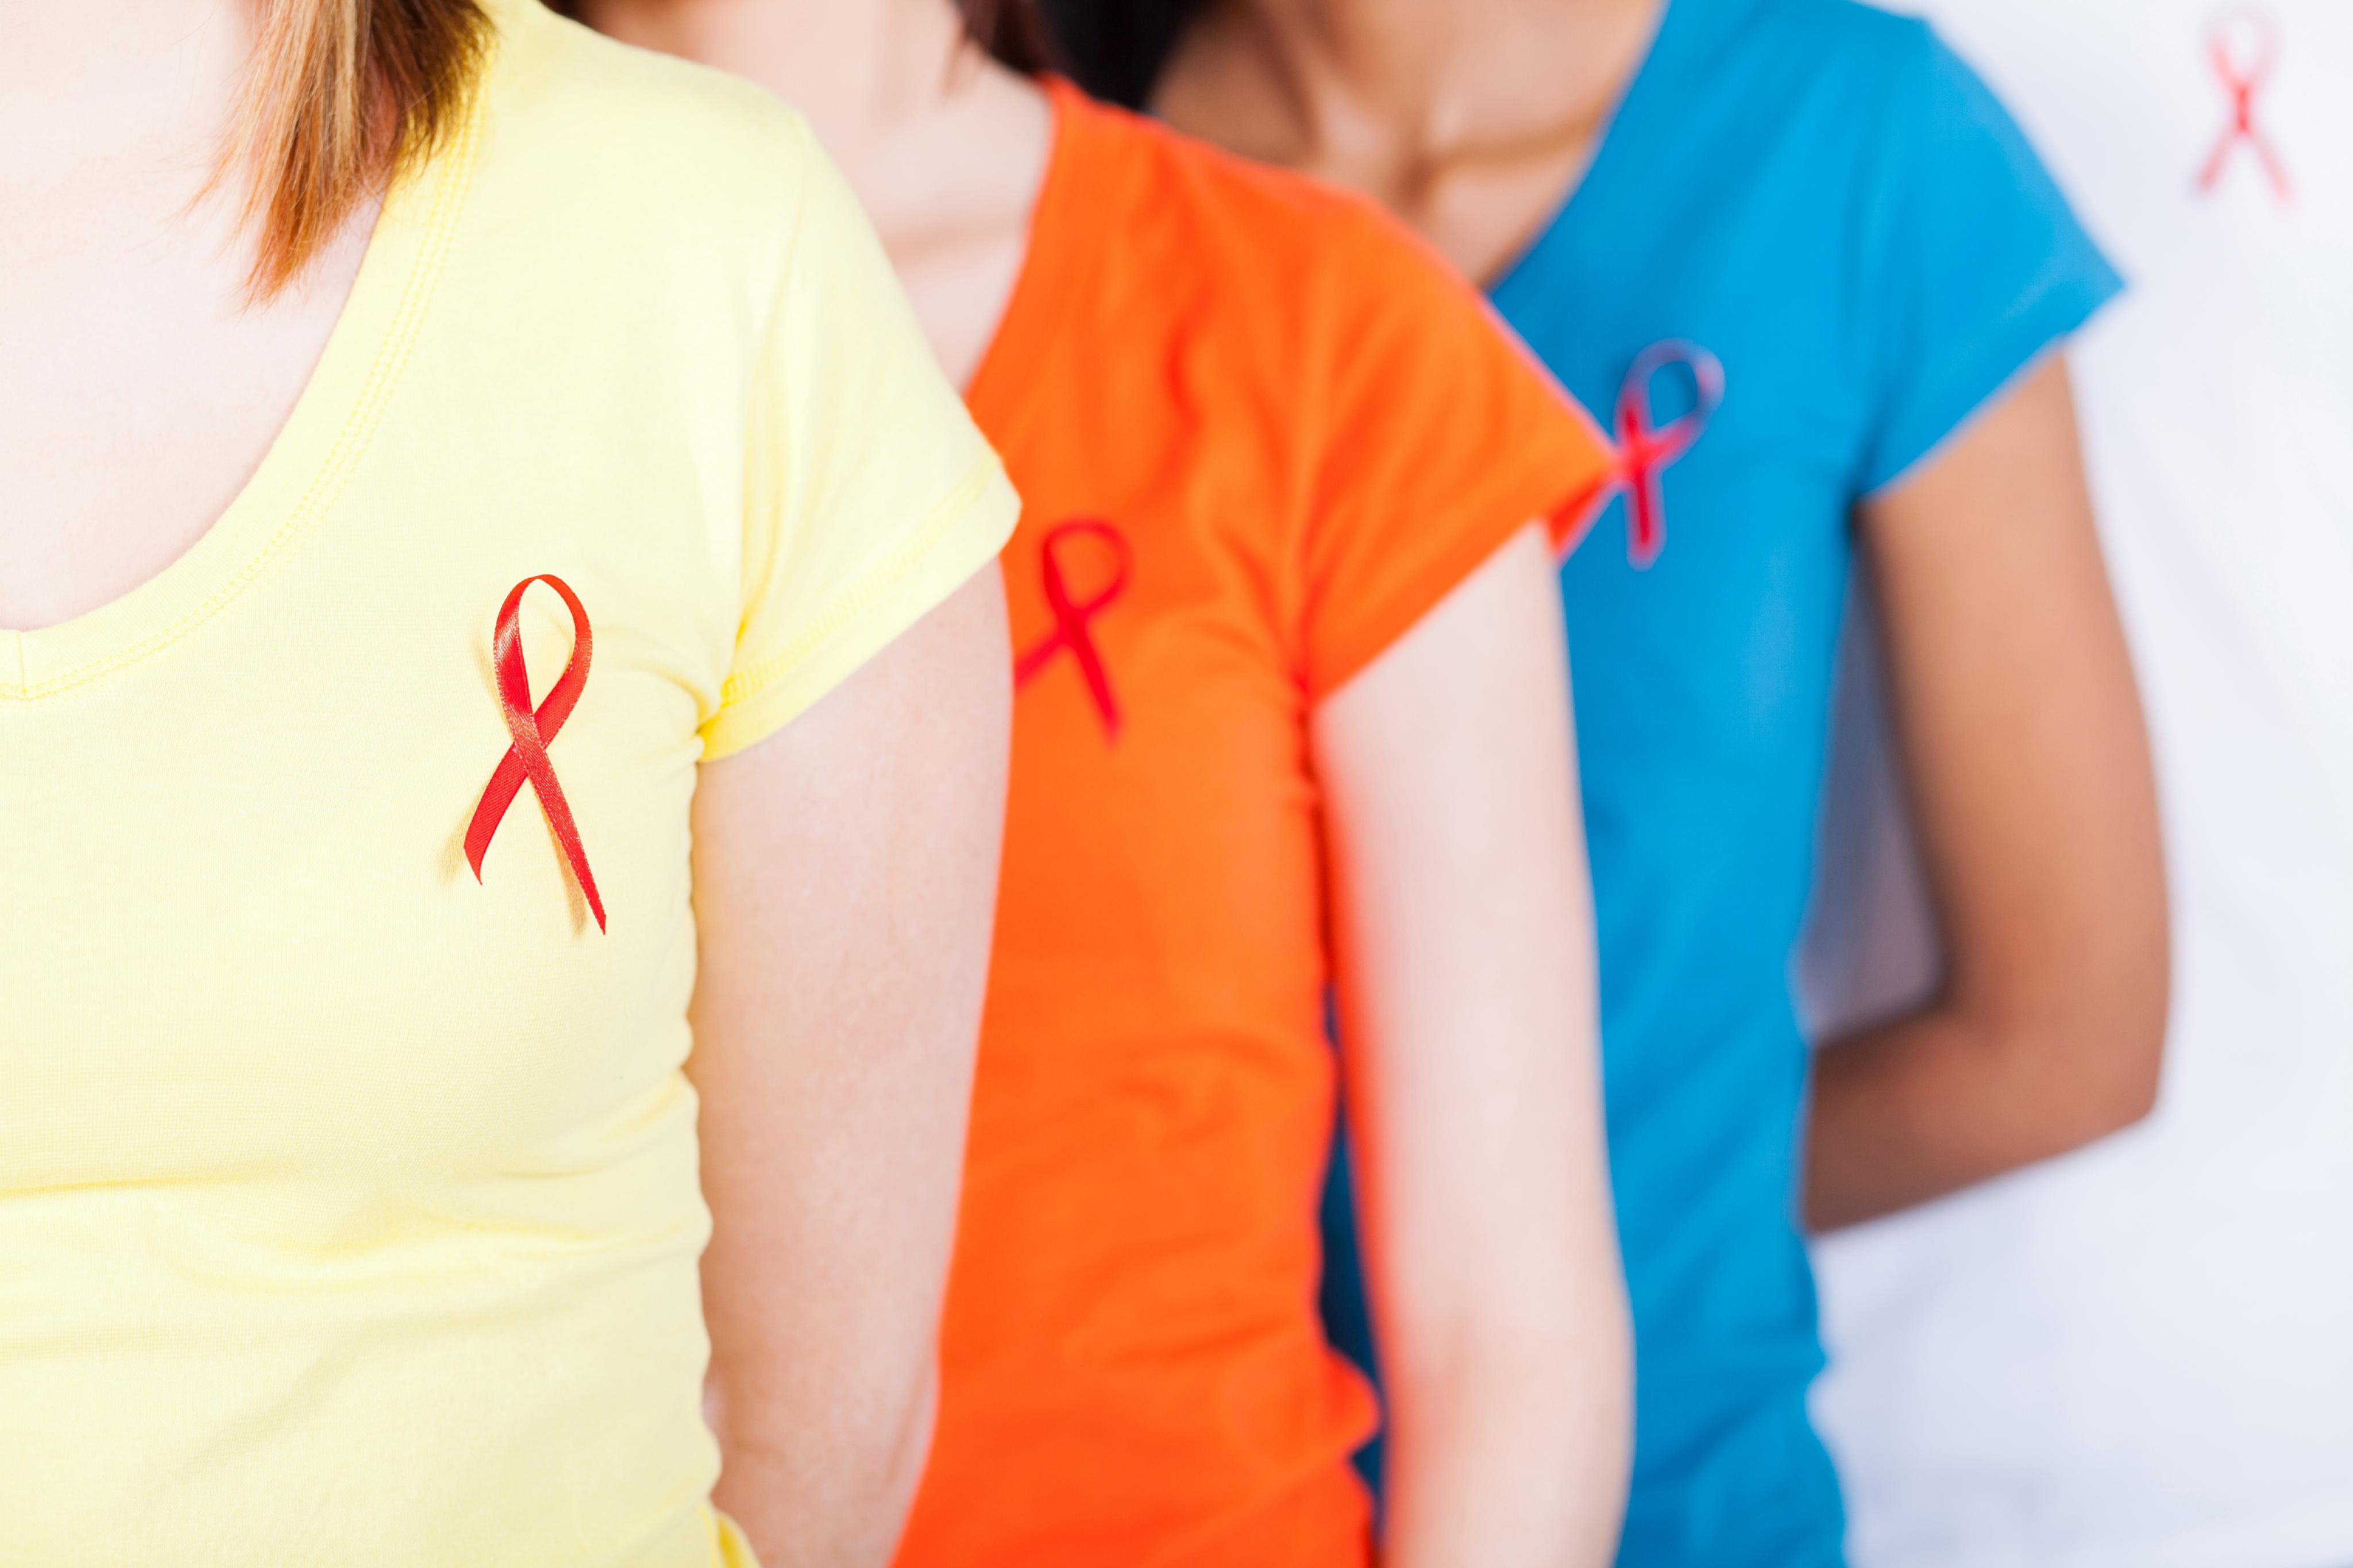 hiv symptoms in women early infection